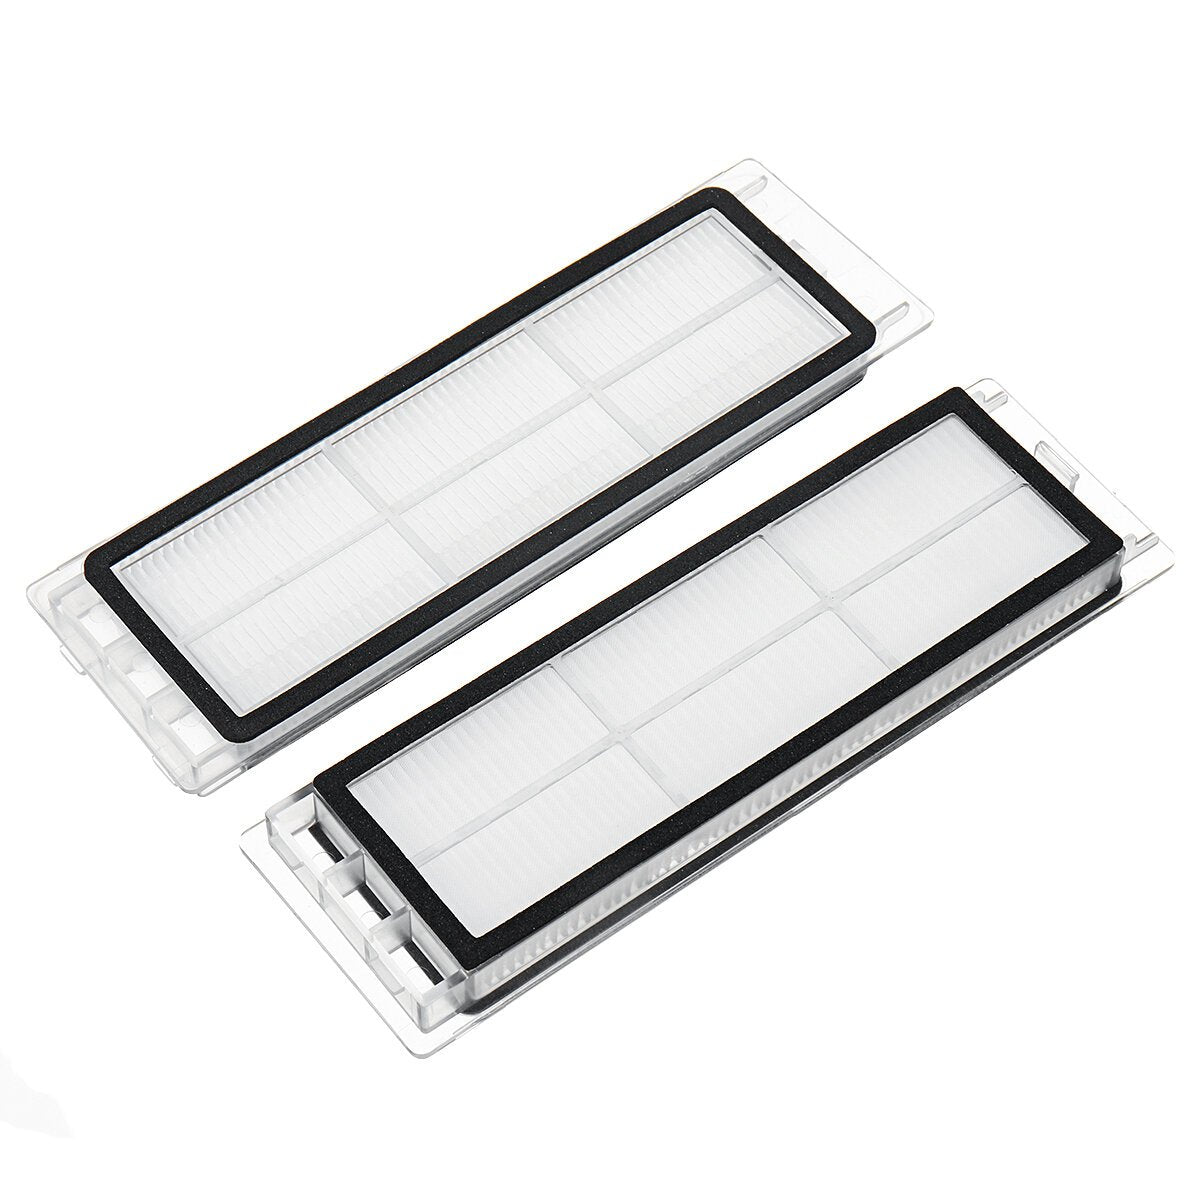 Main Brush Filters Side Brushes Accessories For XIAOMI MI Robot Roborock S5 S6 Vacuum Home Applicance Part